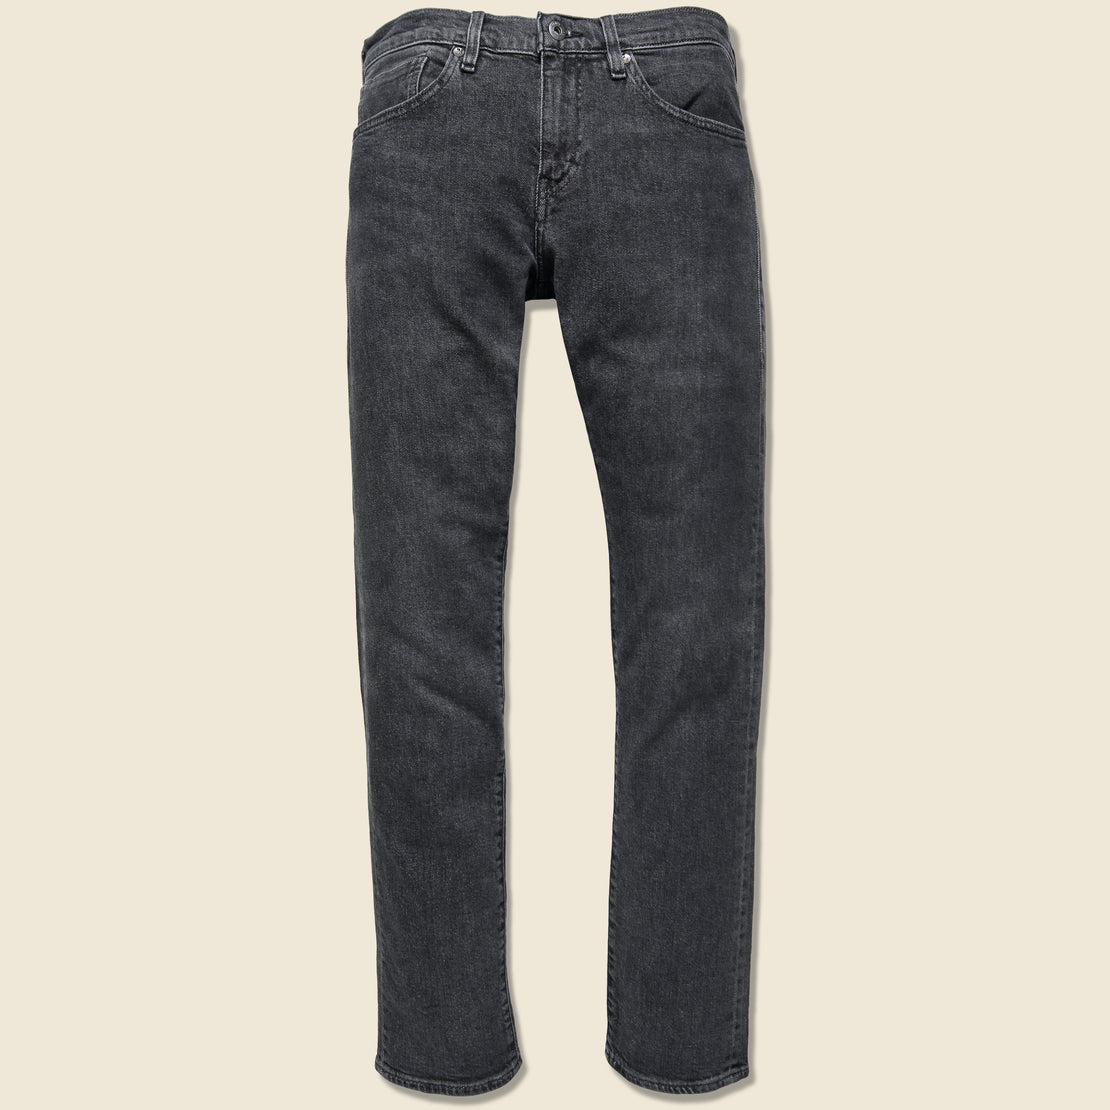 Levis Made & Crafted 511 Slim Fit Jean - Crucible